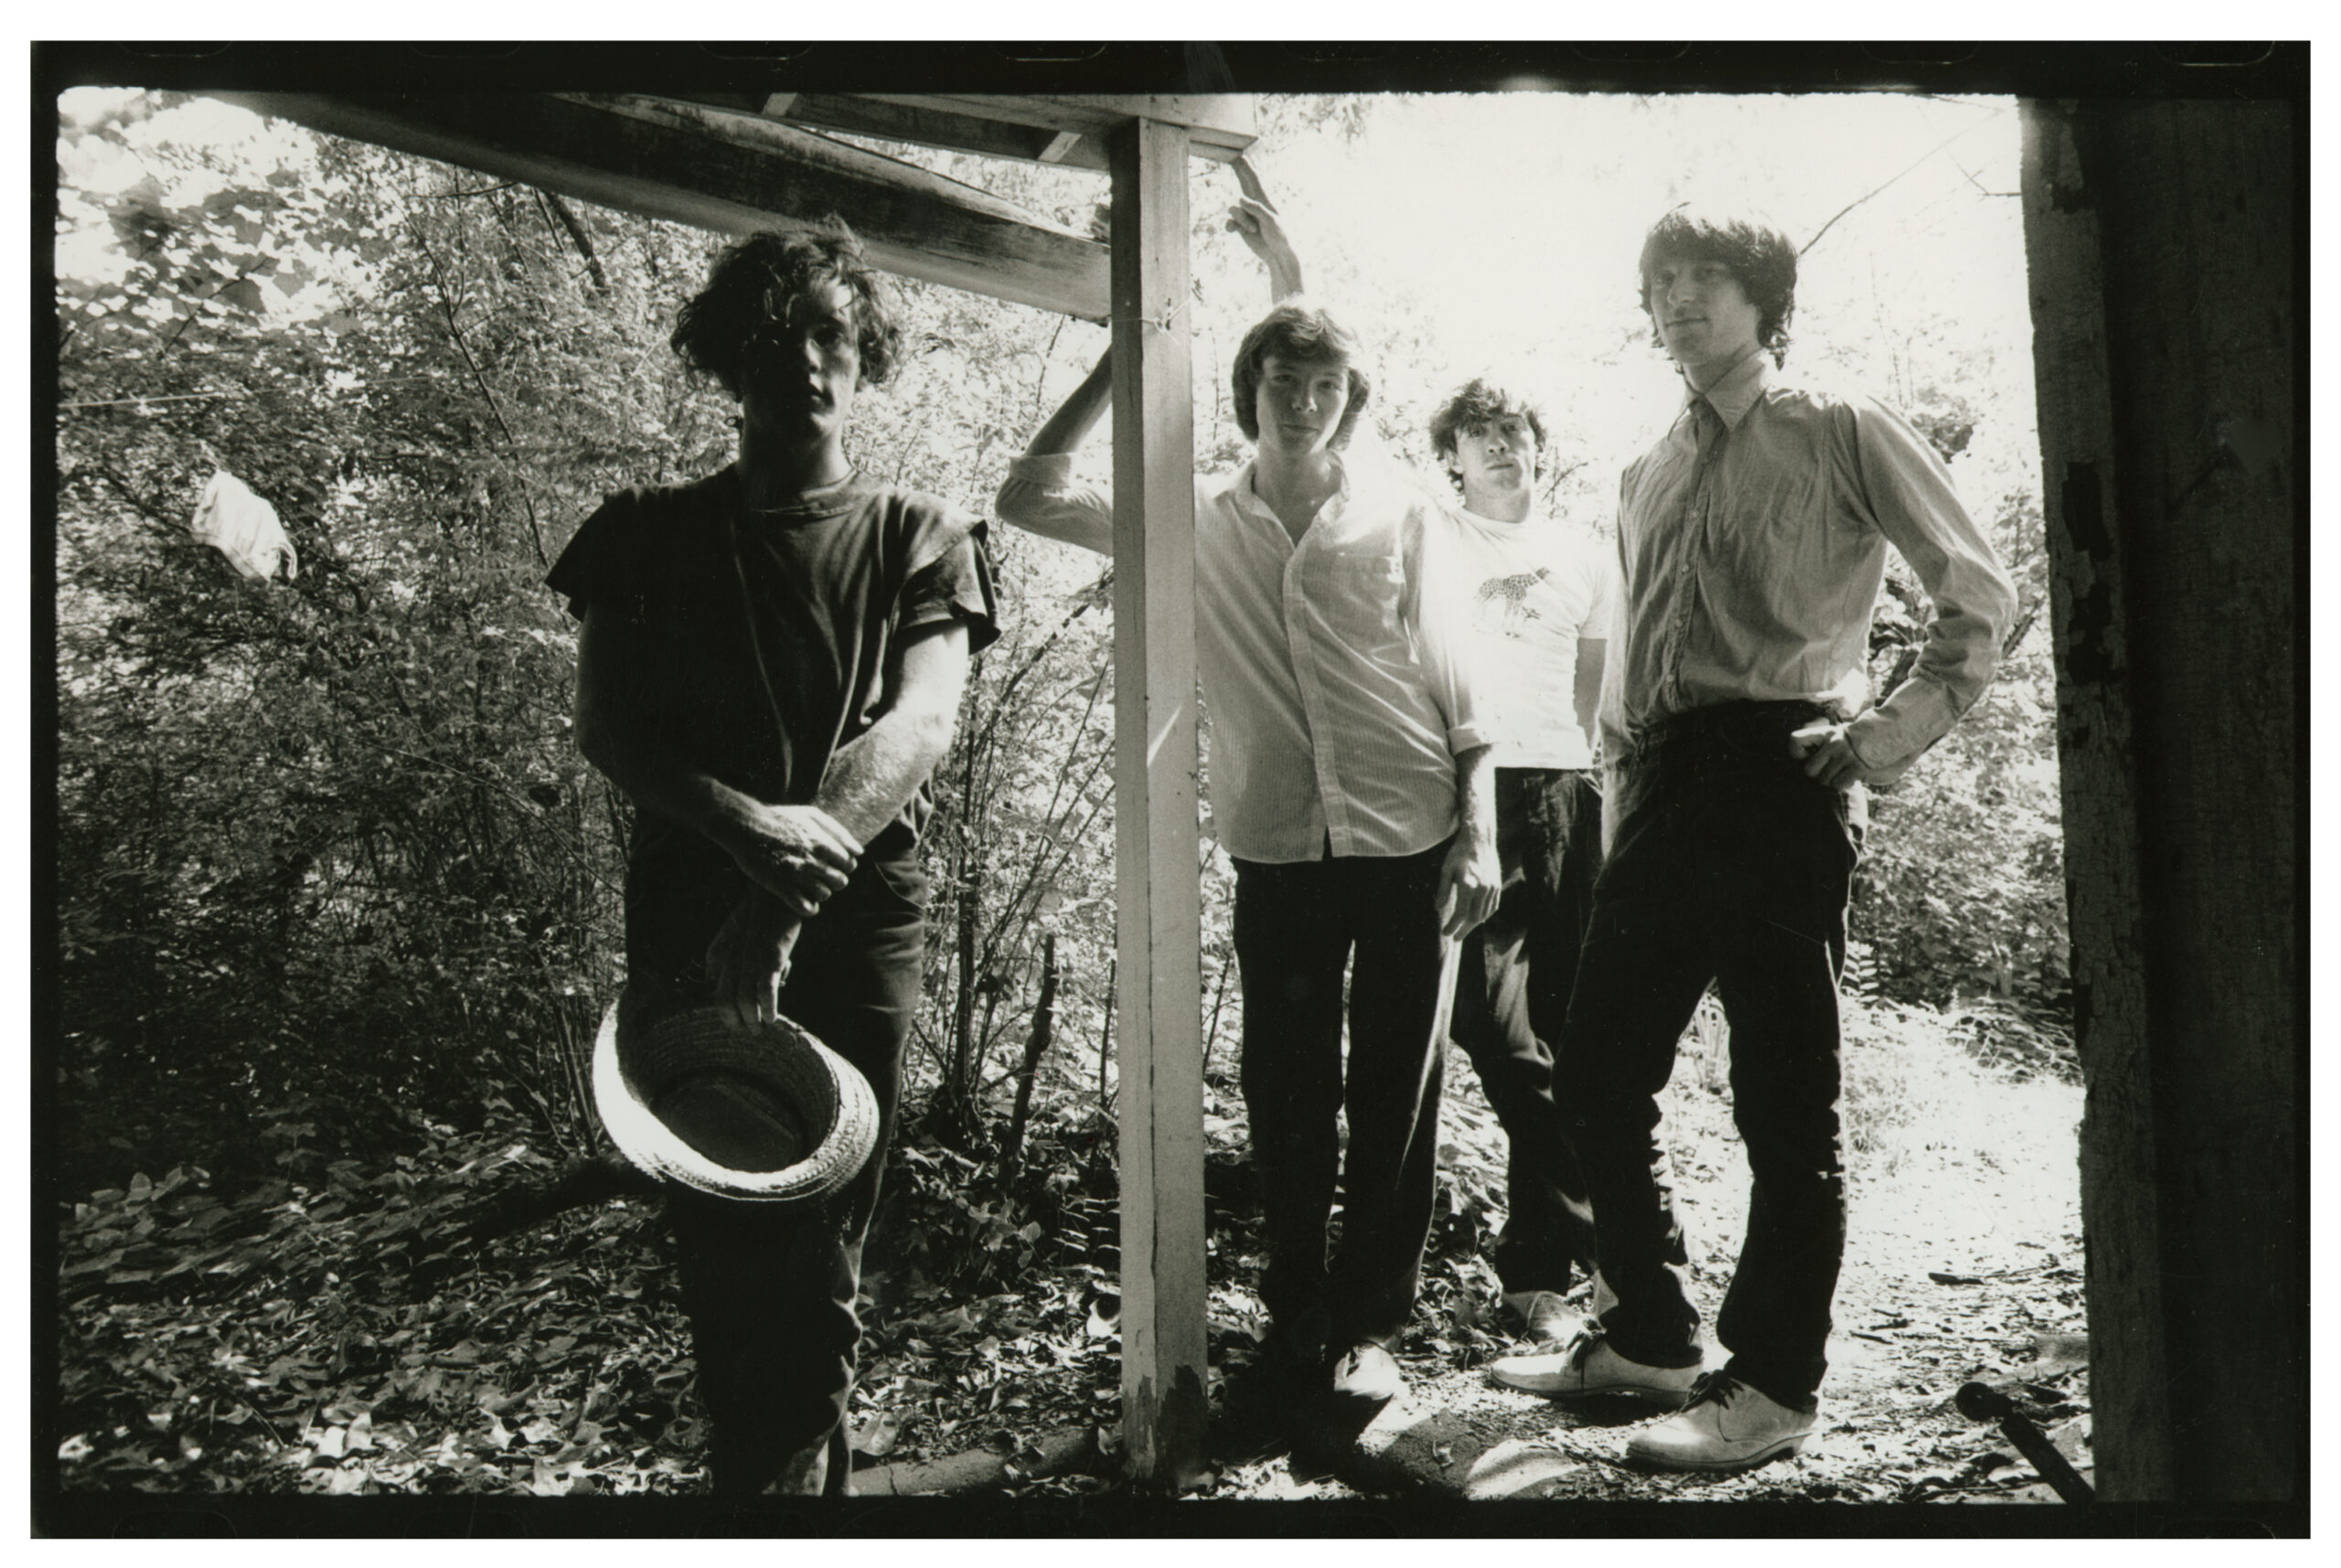 R.E.M. in the early 1980s. Photo: Sandra Lee Phipps.